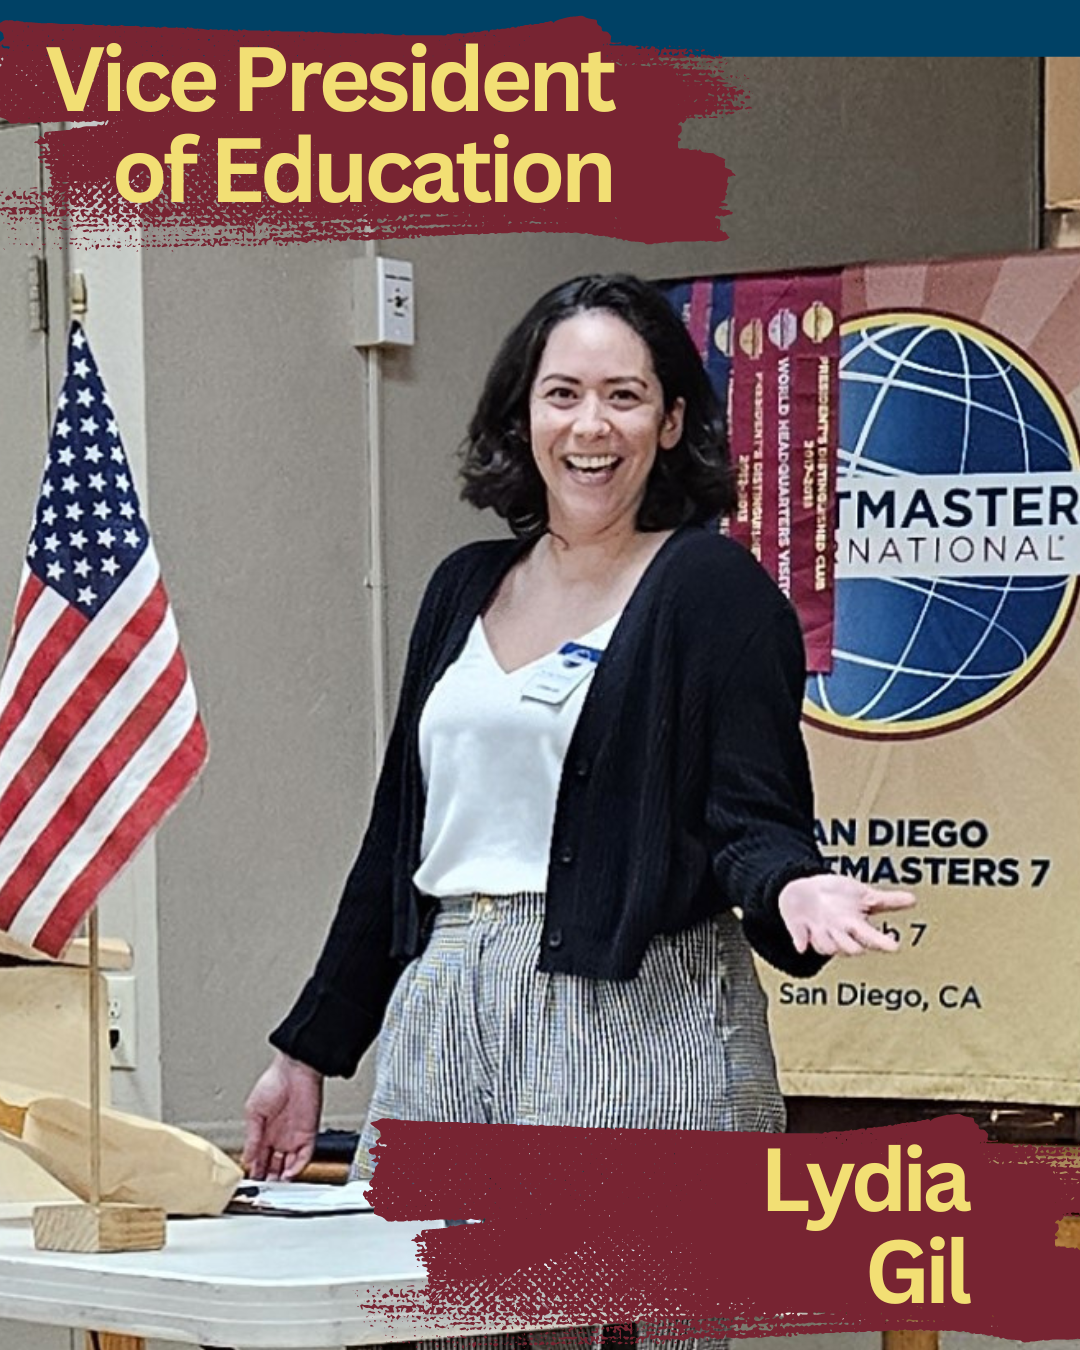 Vice President of Education, Lydia Gil